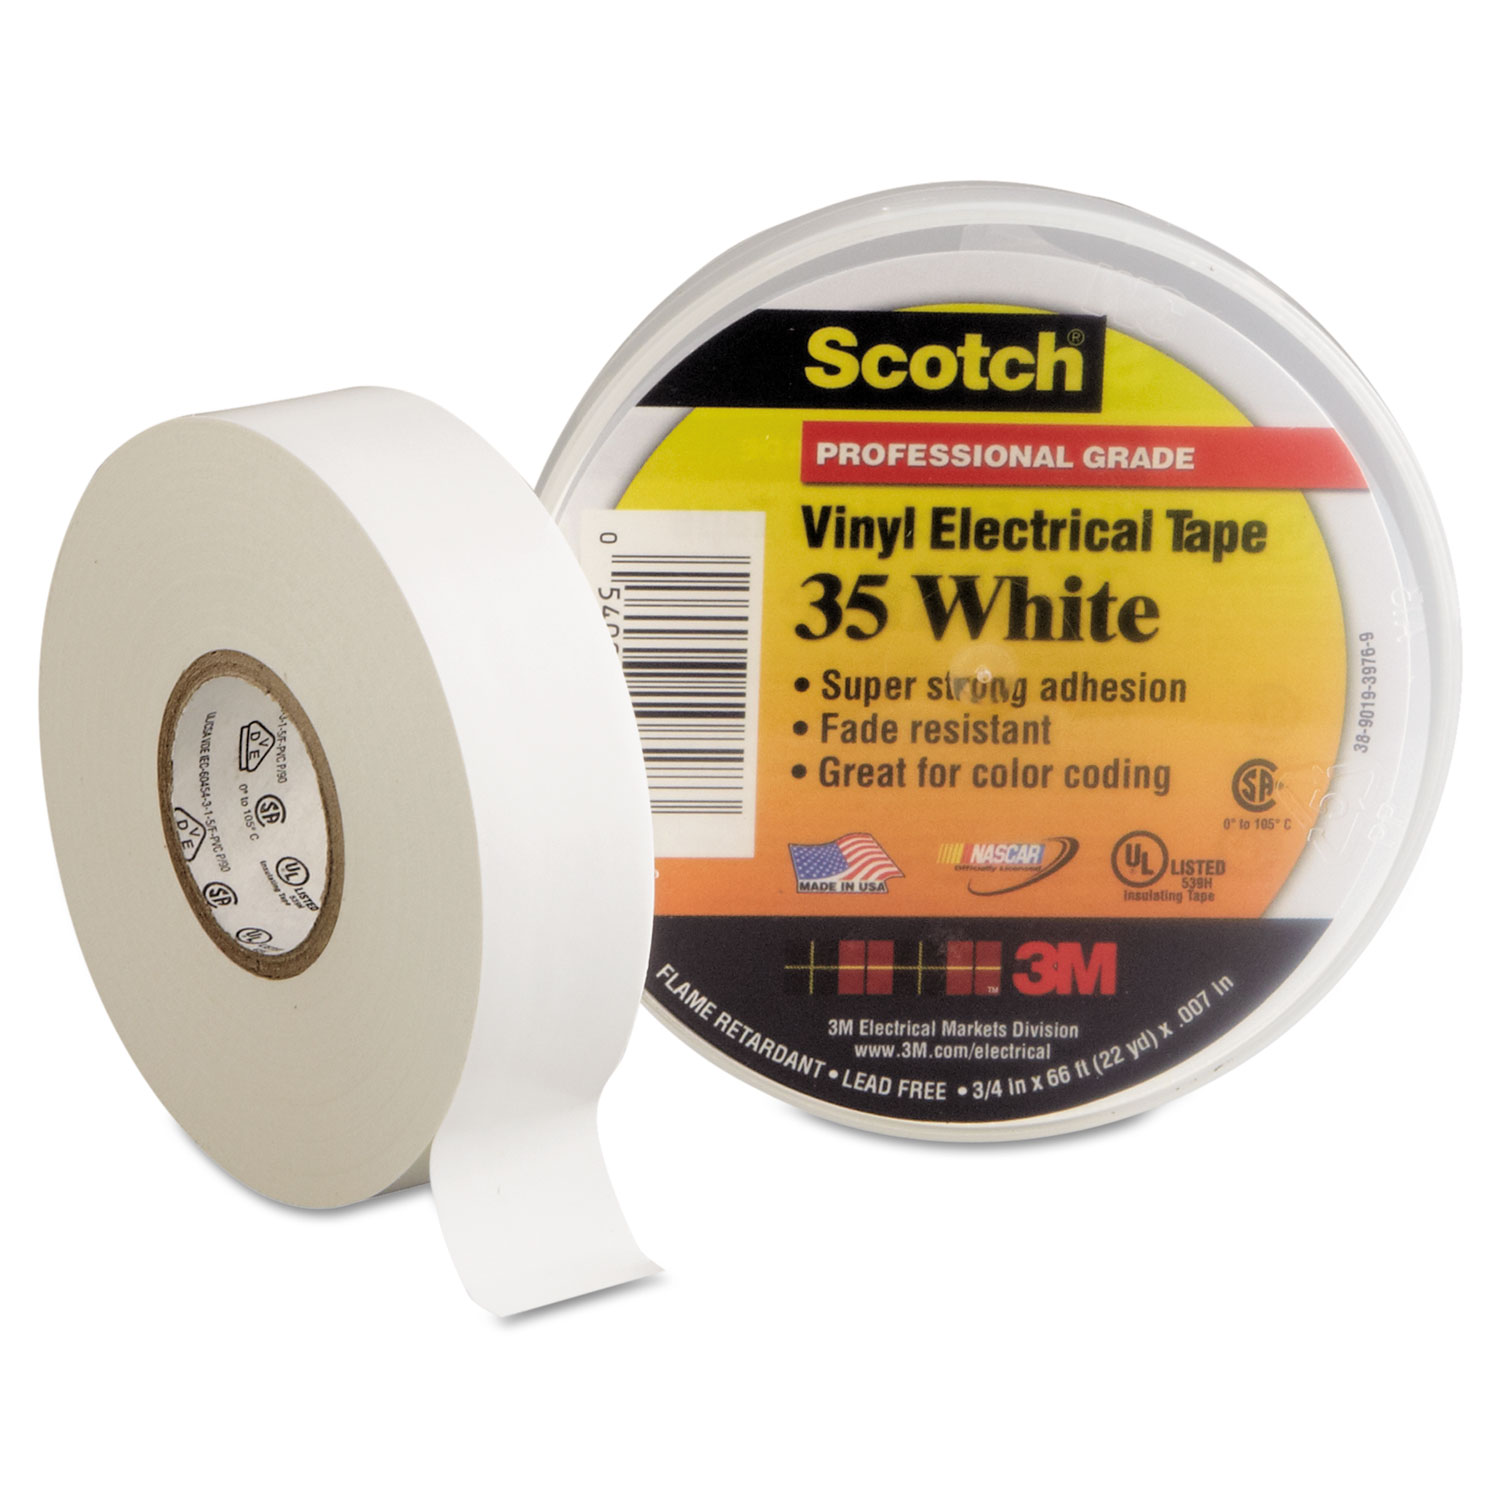  3M 500-10828 Scotch 35 Vinyl Electrical Color Coding Tape, 3 Core, 0.75 x 66 ft, White (MMM10828) 